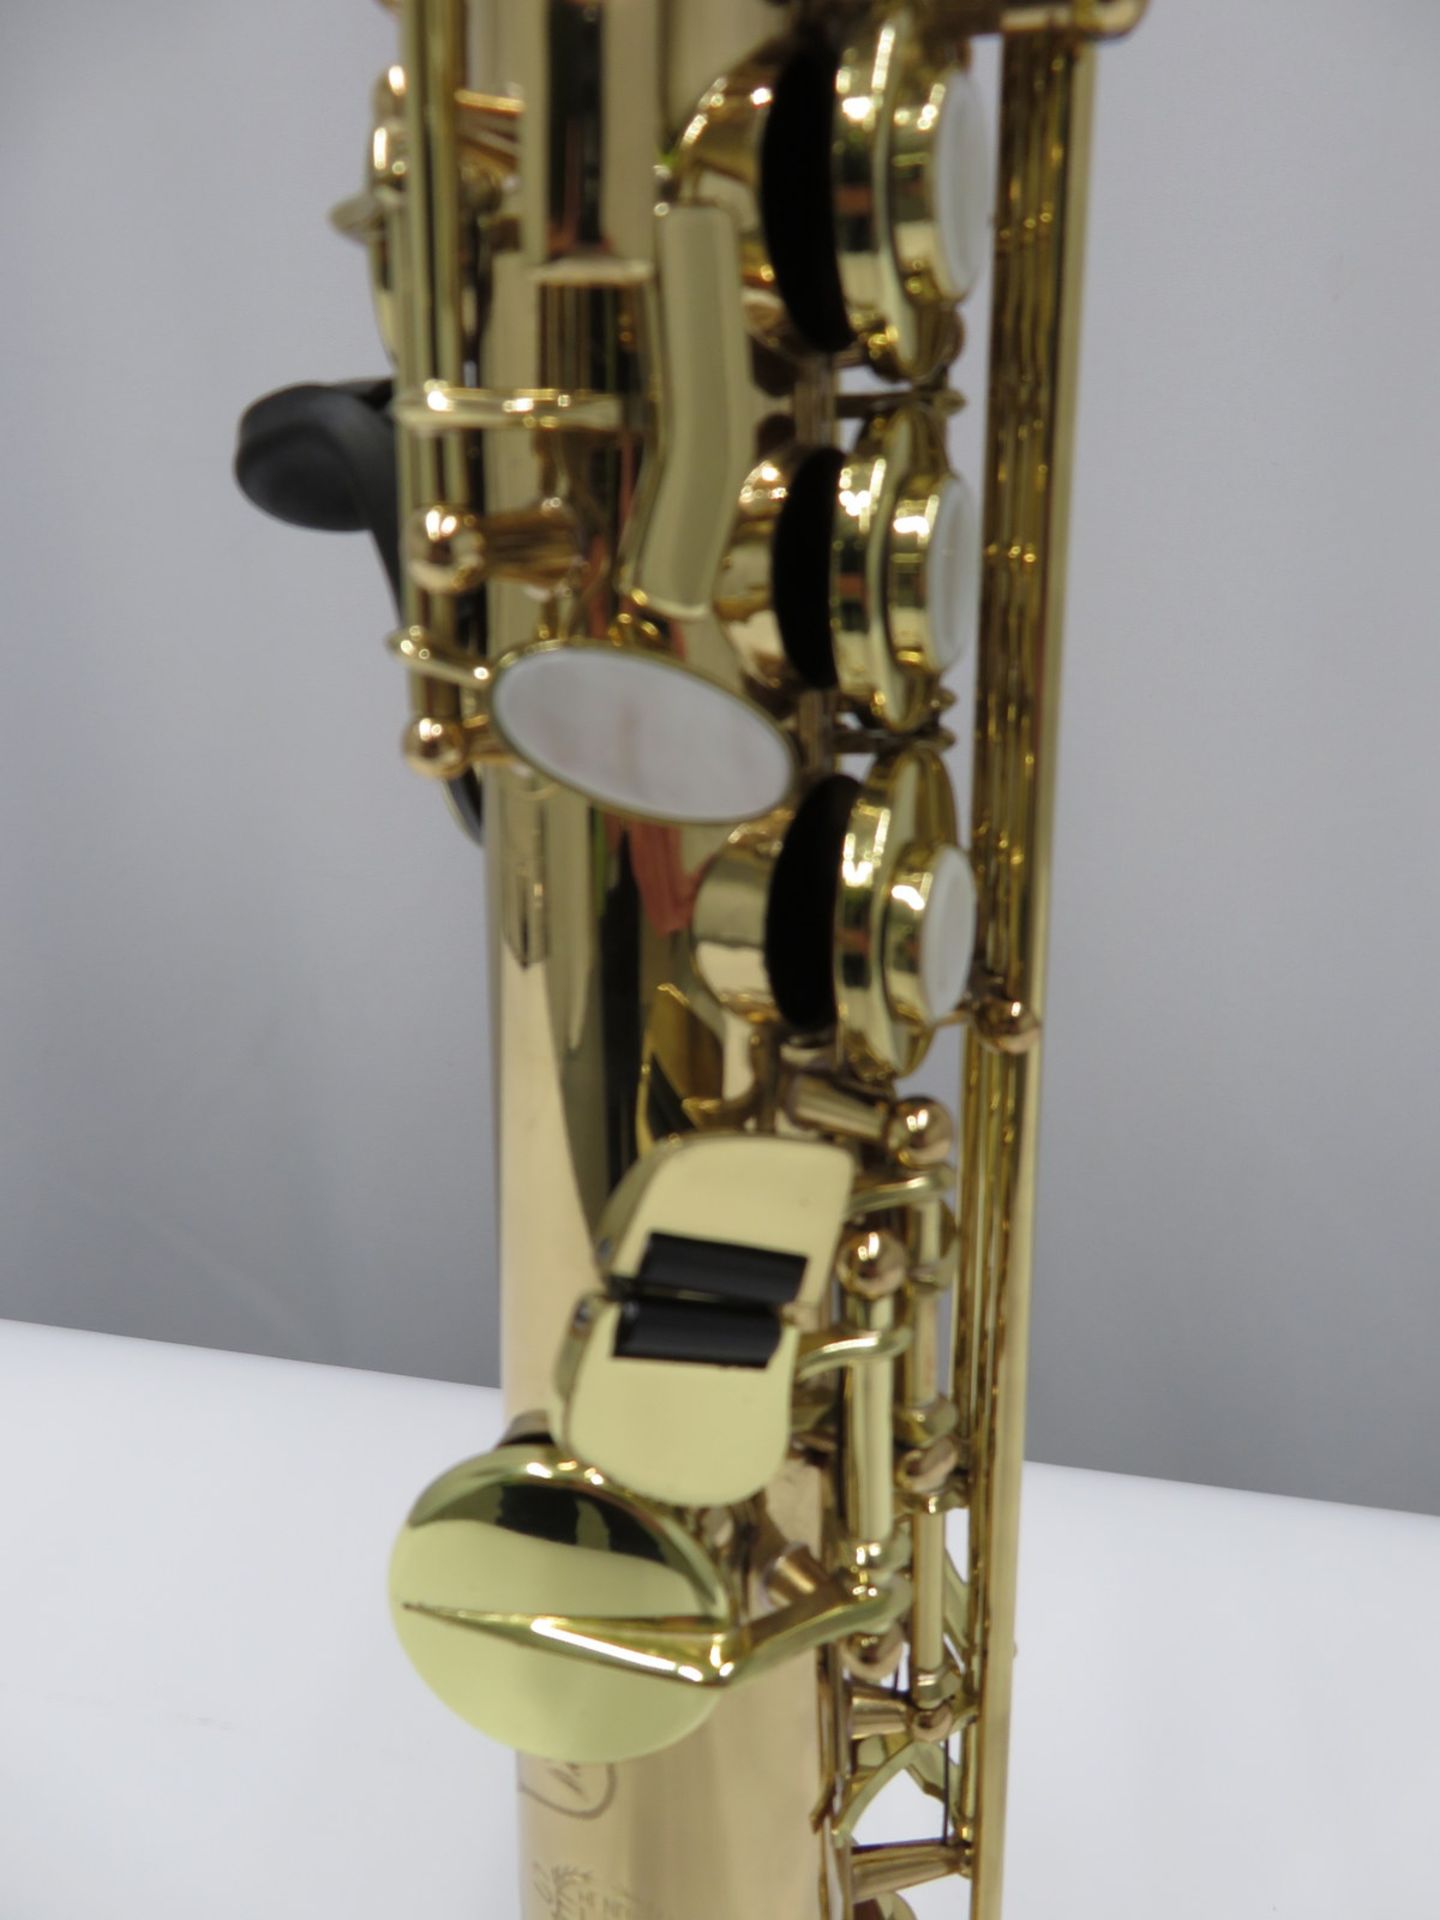 Henri Selmer 80 super action series 2 soprano saxophone with case. Serial number: N.533401. - Image 6 of 22